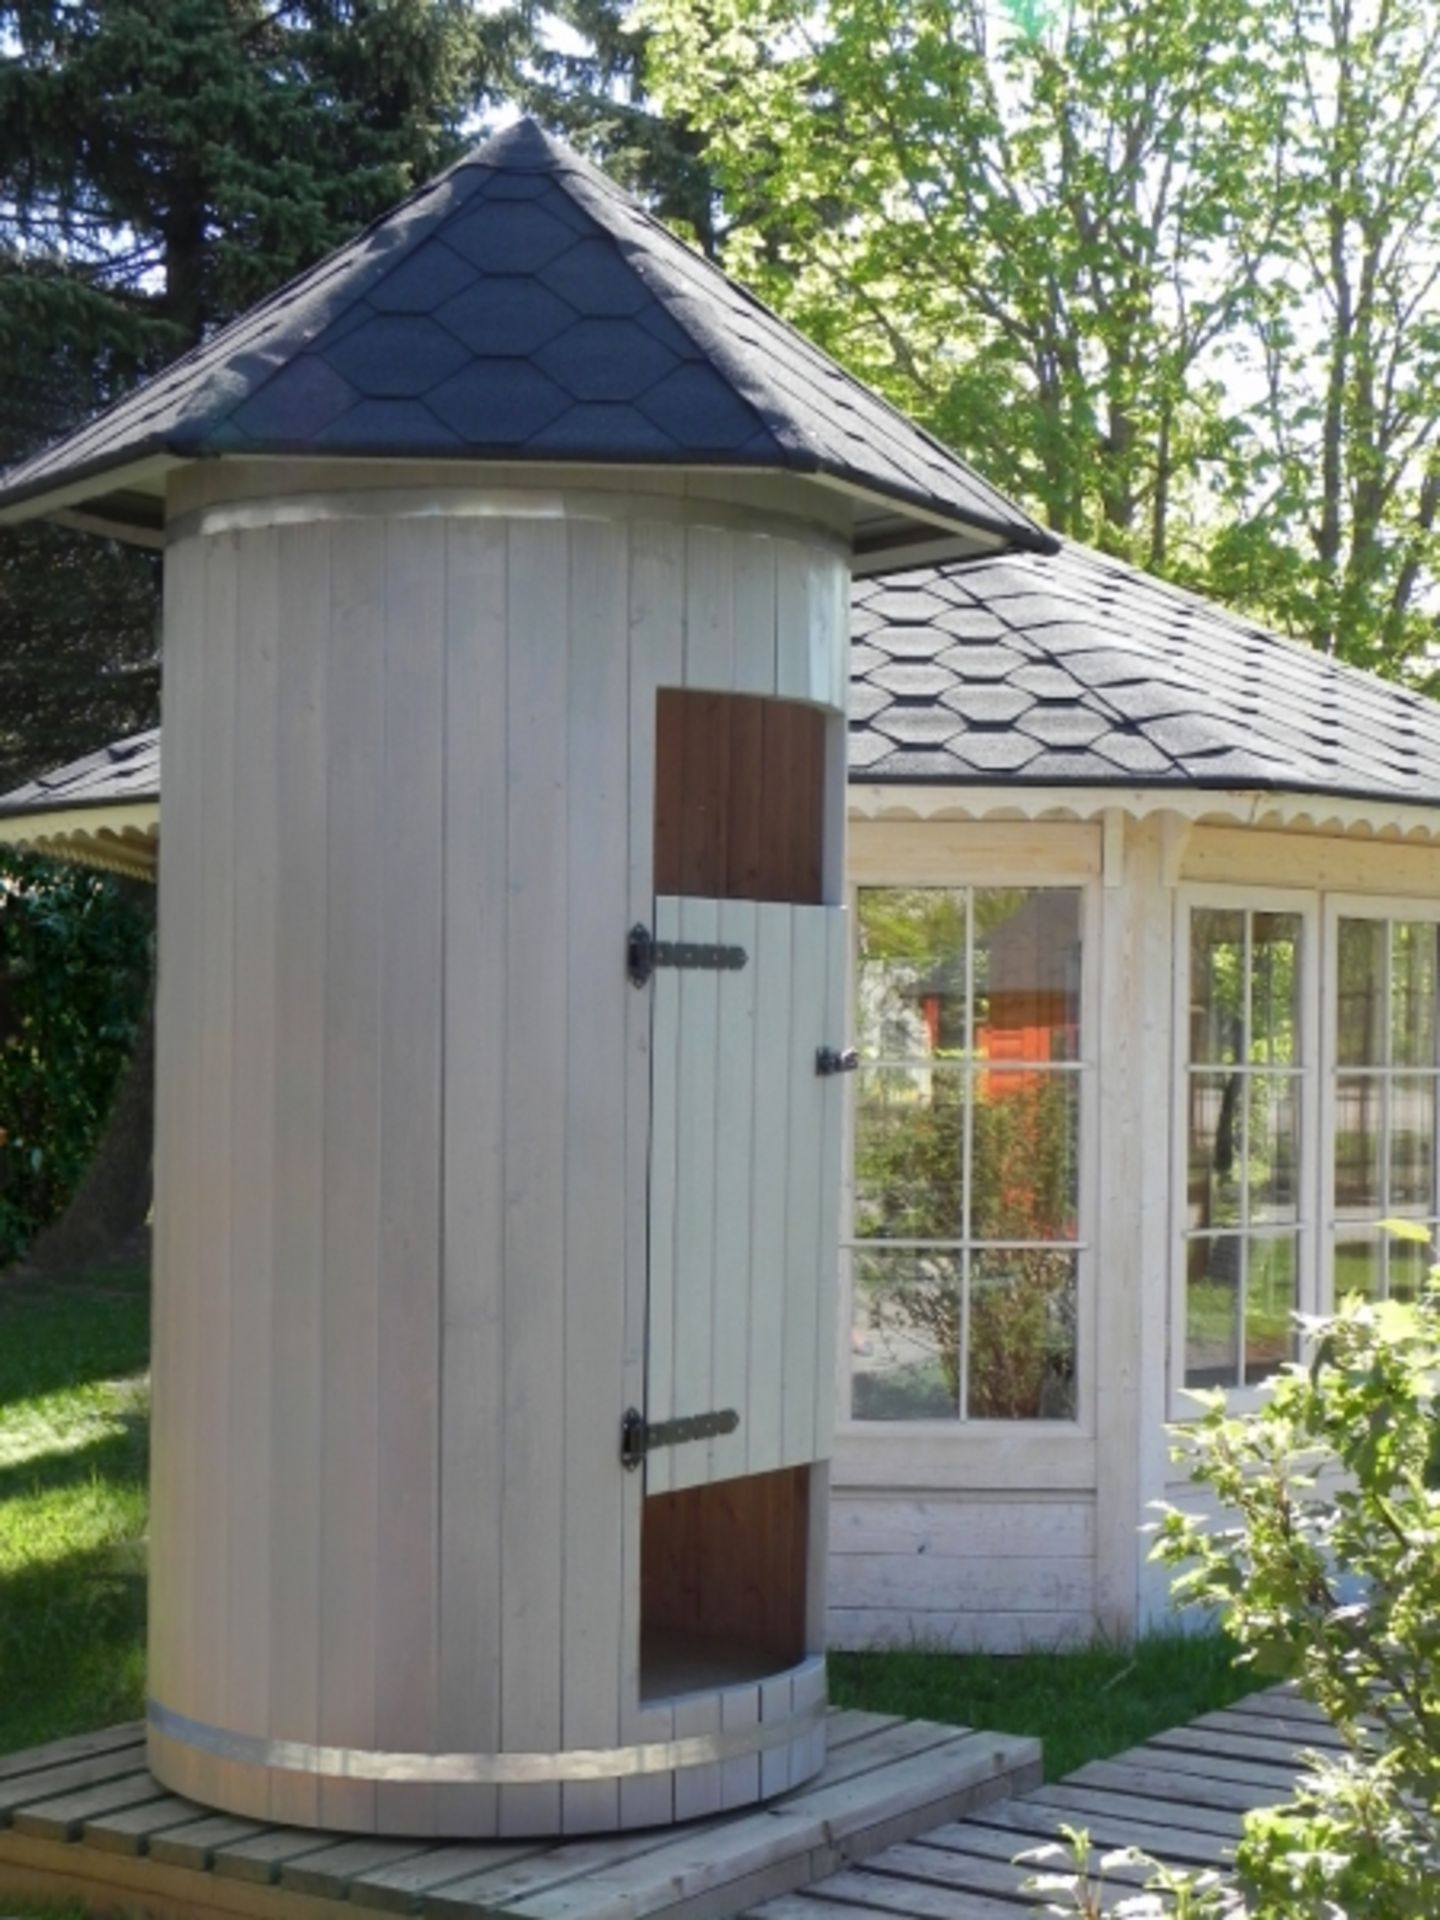 V Brand New Spruce 1.2m Shower Room - Total Height 3m - Height To Roof 2.3m - Roof Is Covered In